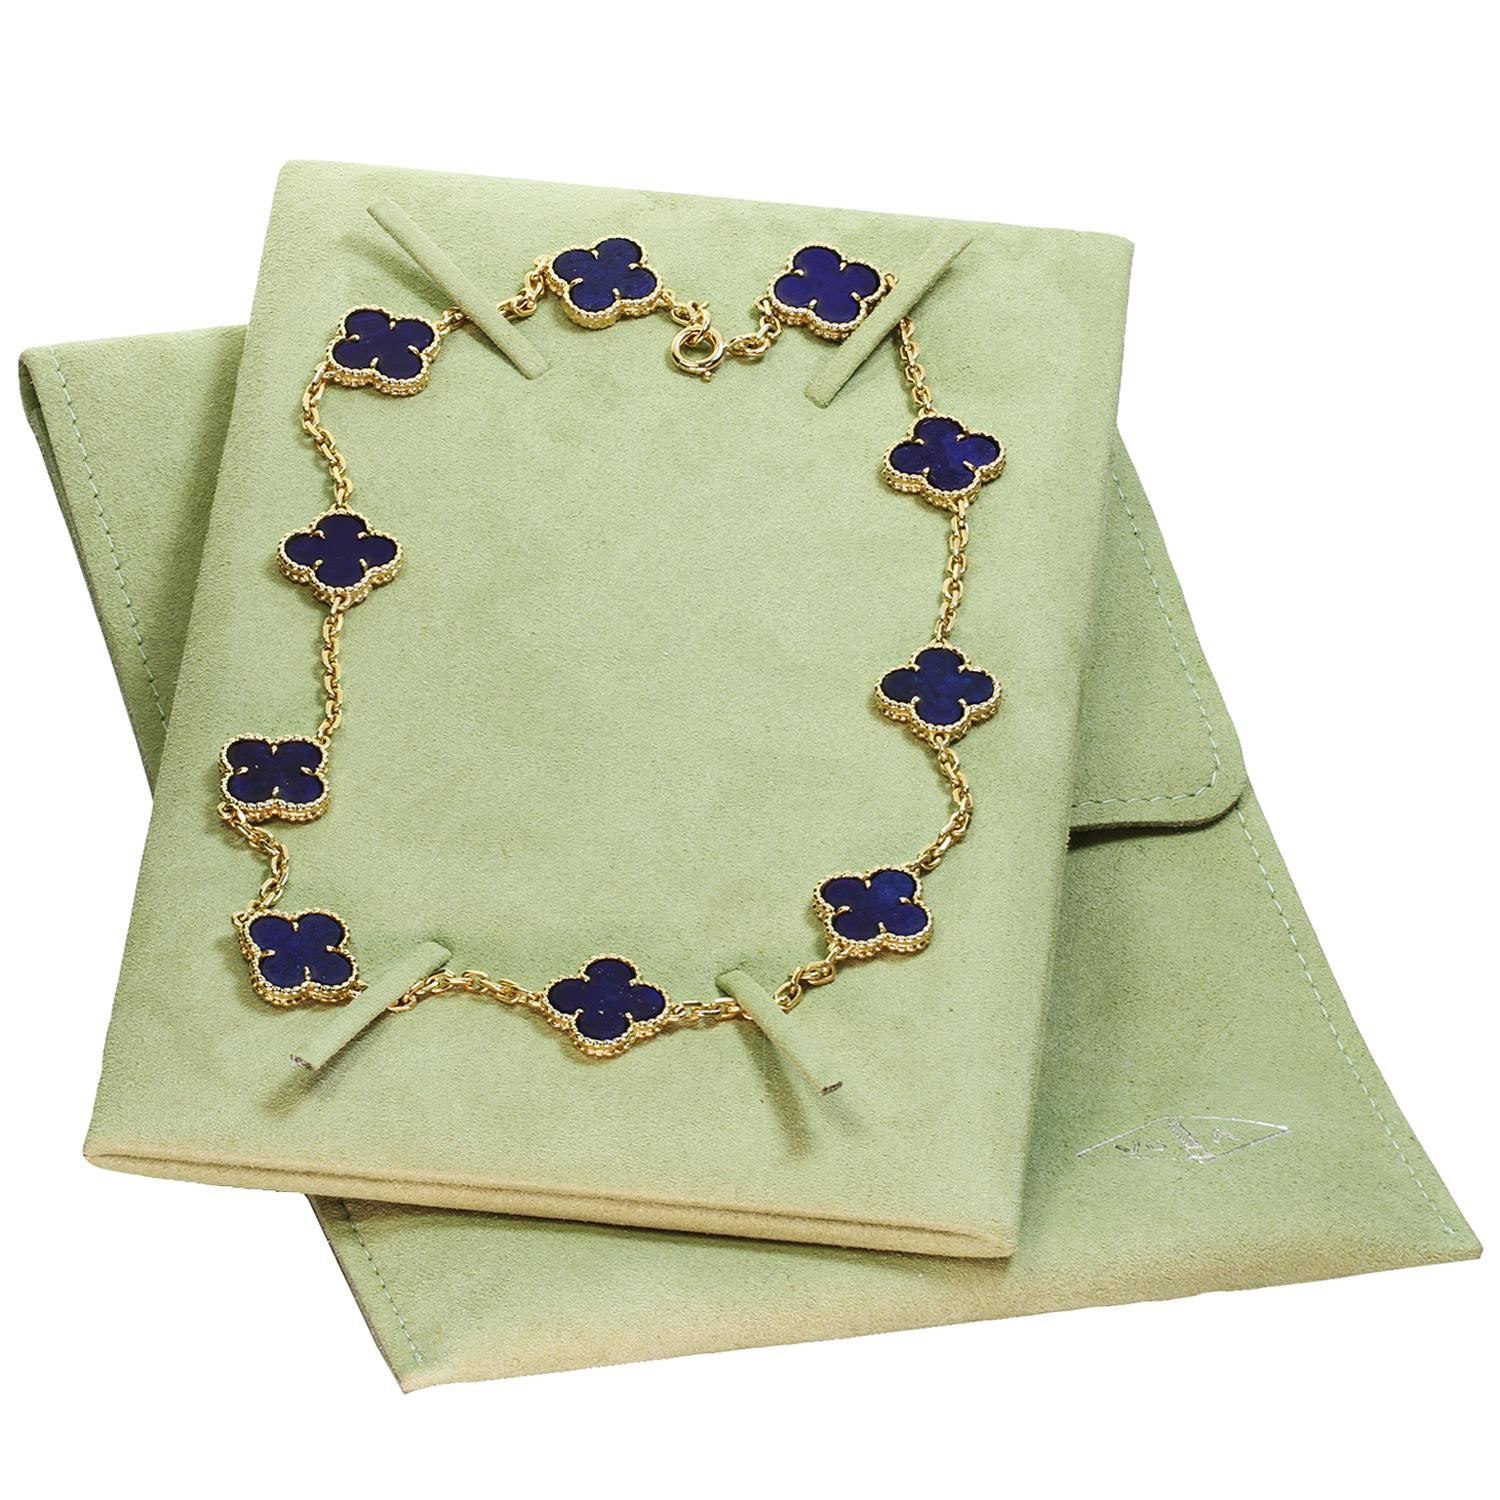 This classic vintage Van Cleef & Arpels necklace is crafted in 18k yellow gold and features 10 lucky clover motifs inlaid with lapis lazuli in round bead settings. Made in France circa 1980s.  Measurements: 0.59